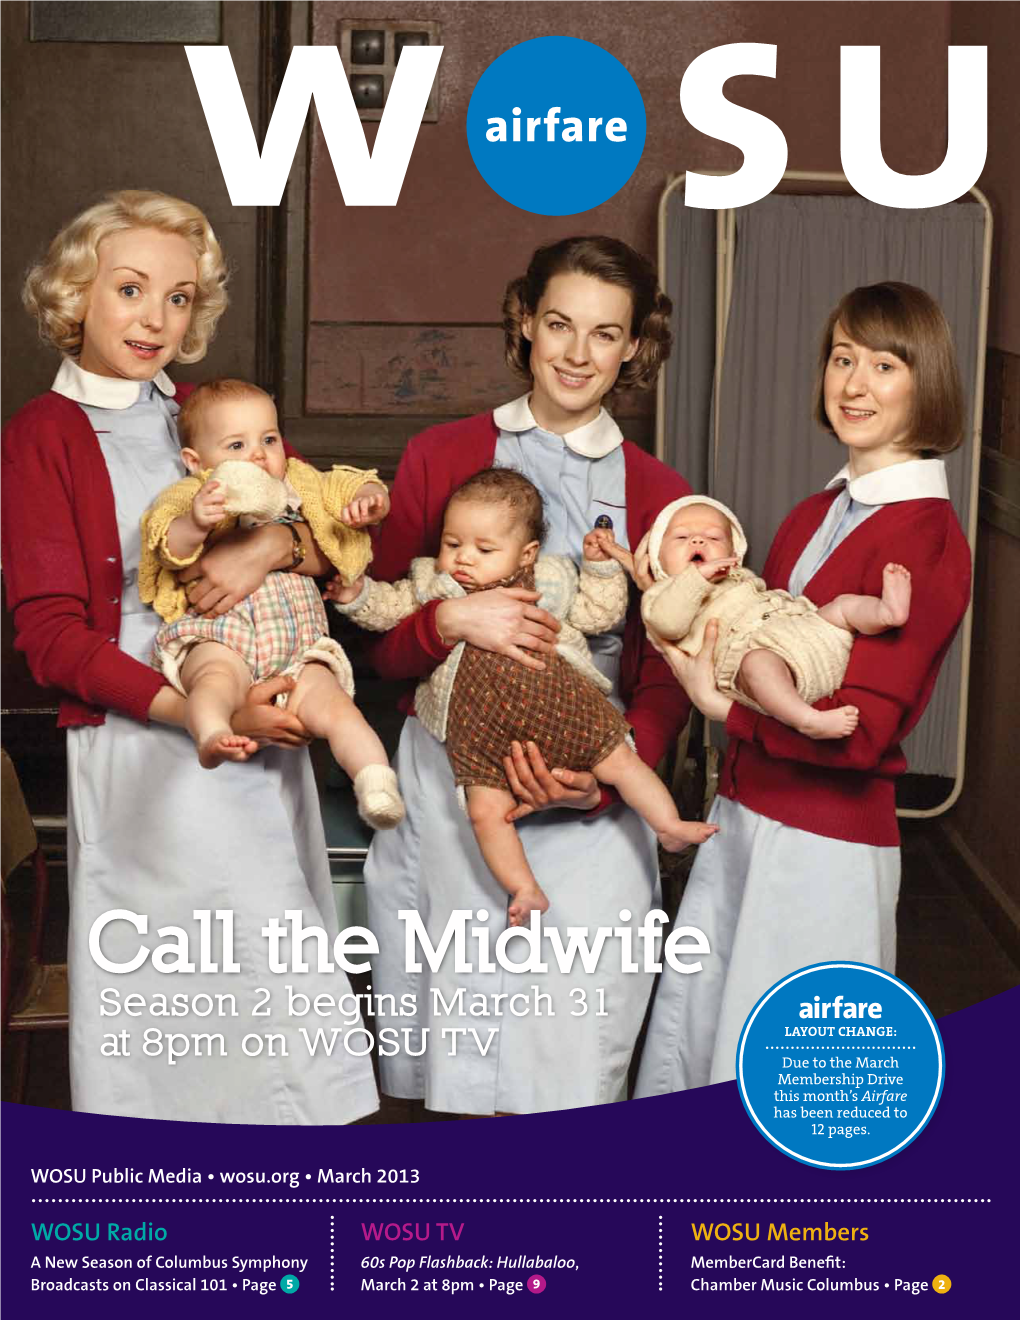 Call the Midwife Season 2 Begins March 31 Layout Change